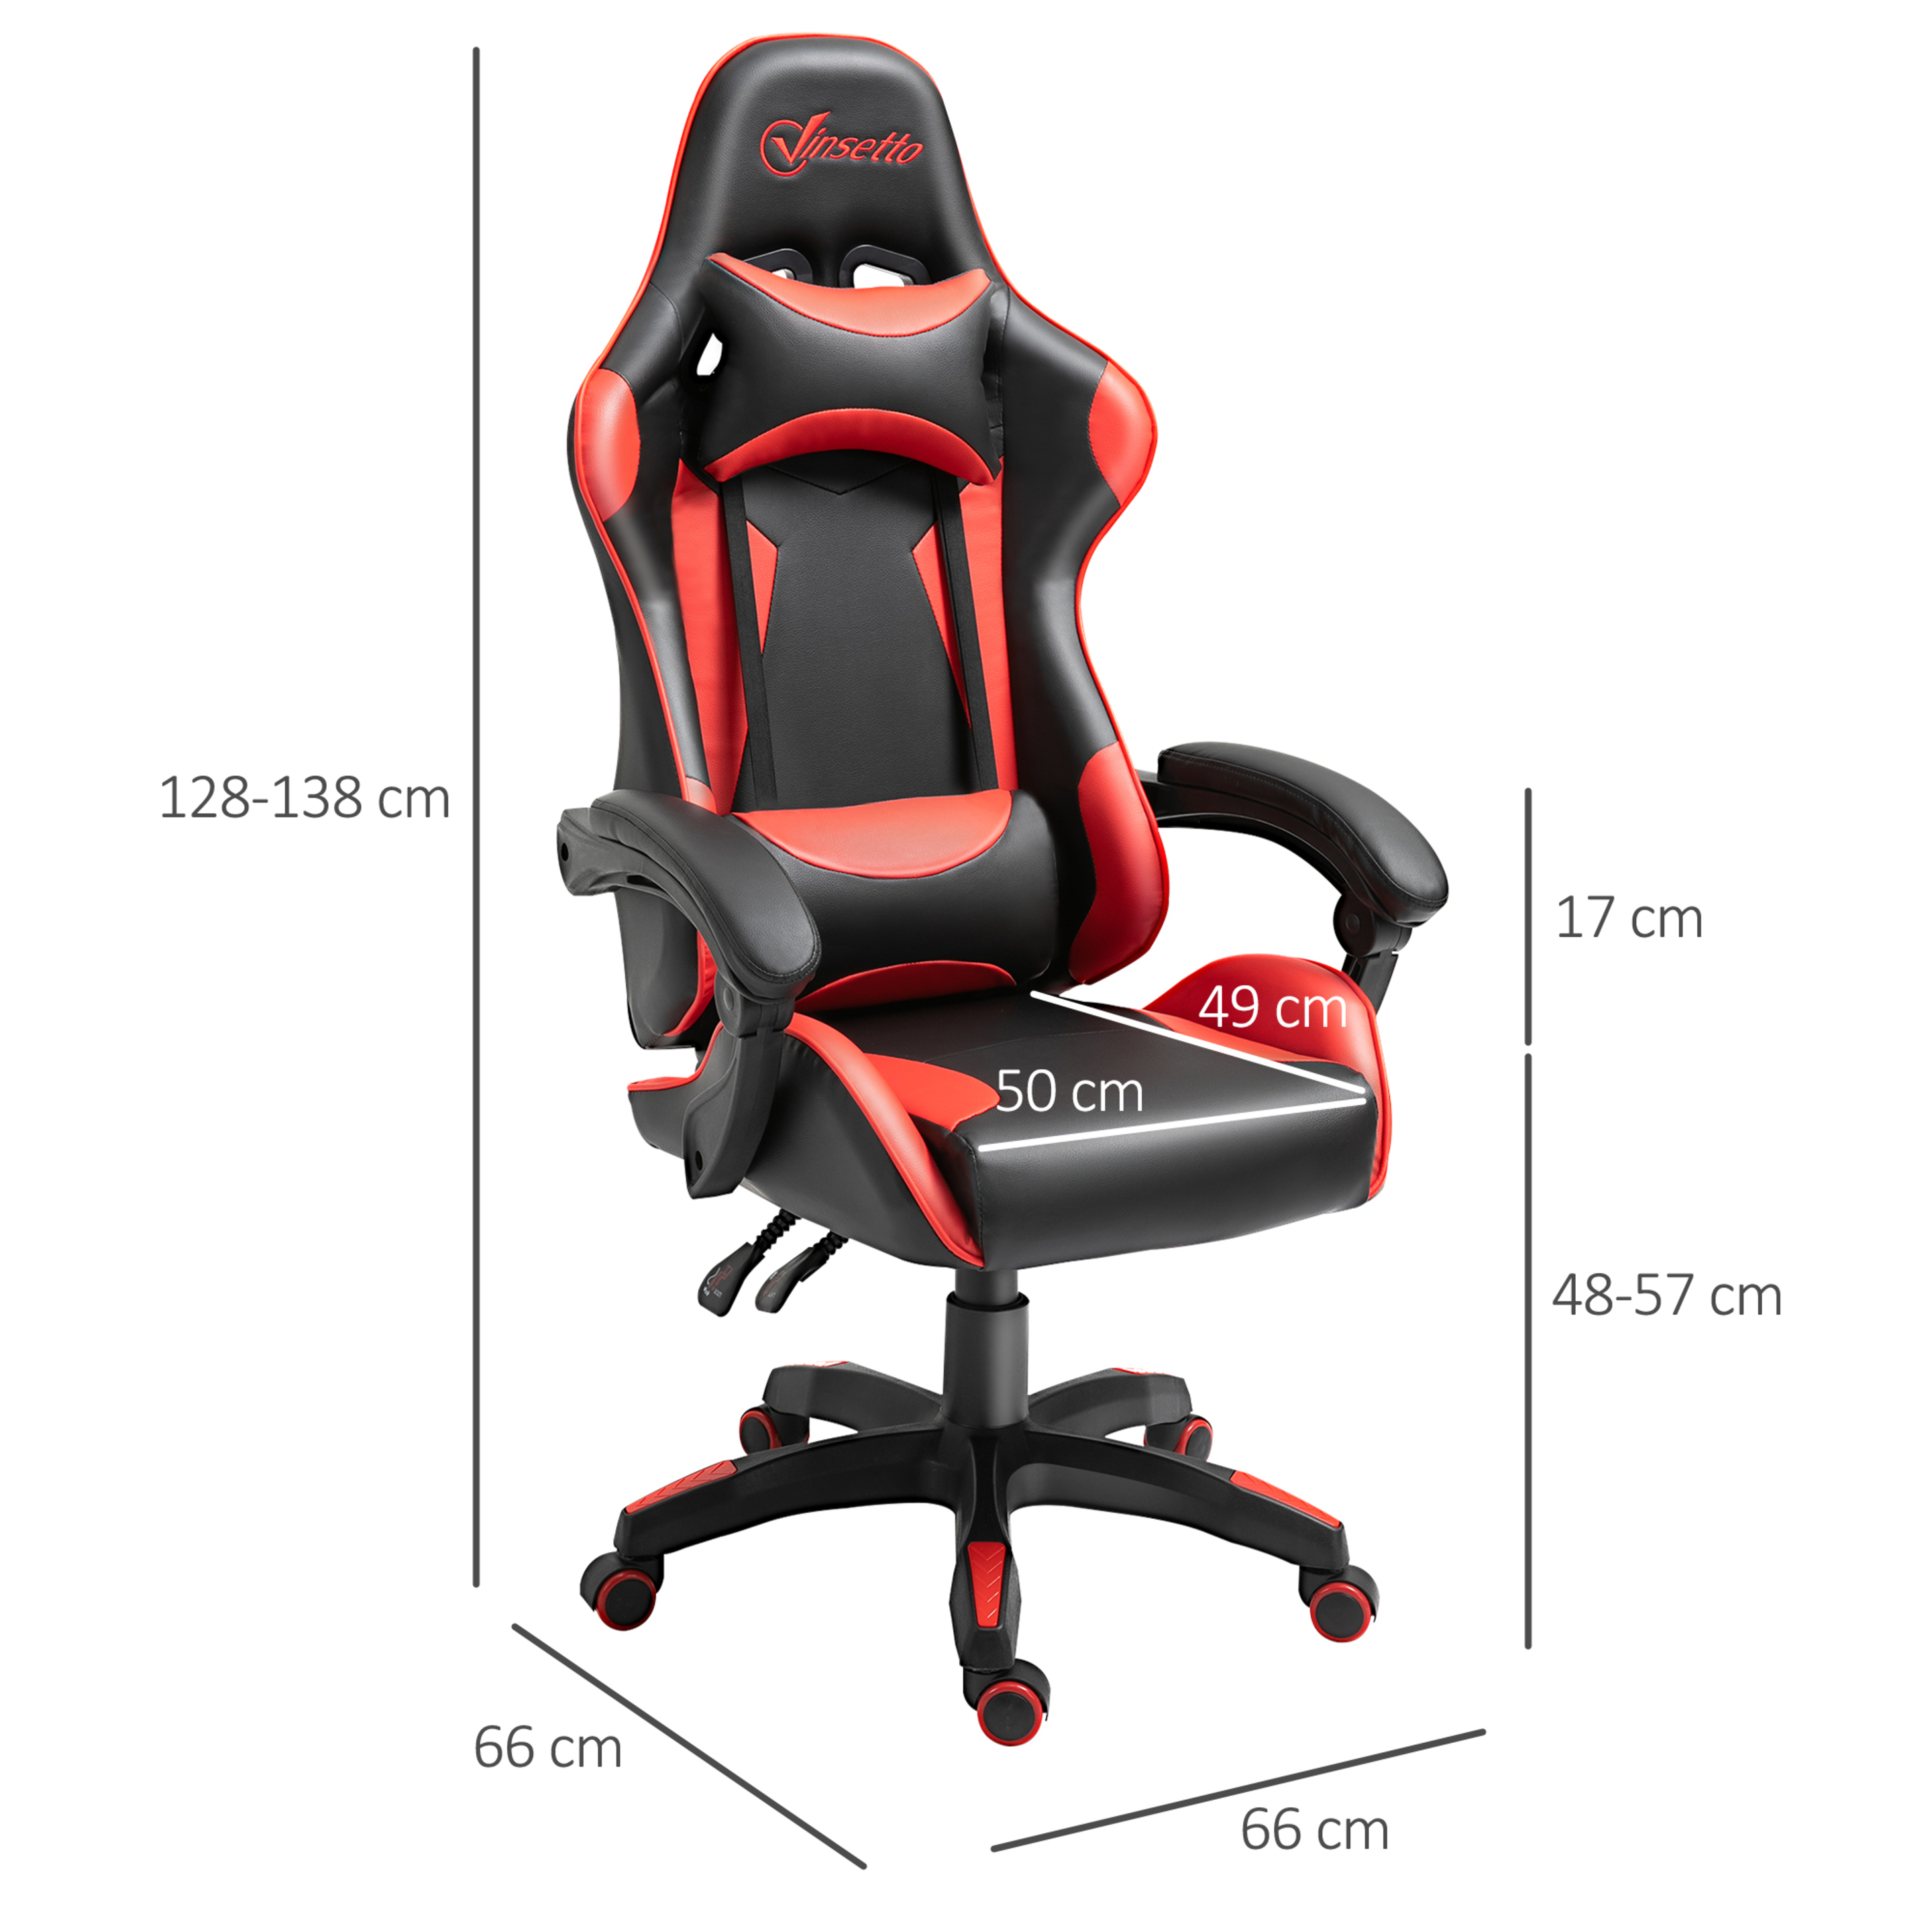 Silla Gaming Vinsetto 921-445rd